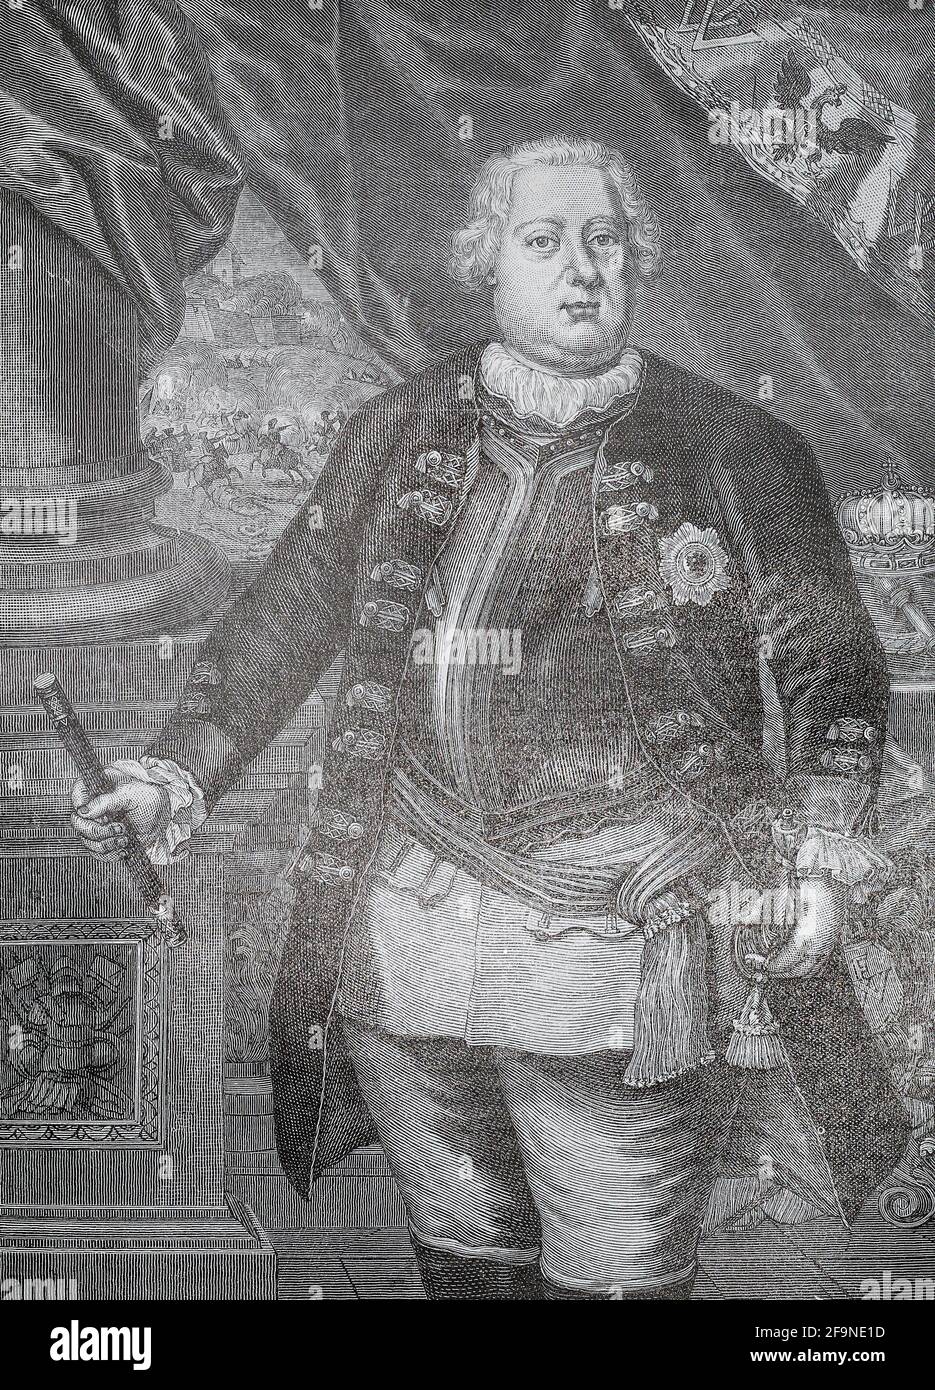 Frederick William I known as the 'Soldier King' was the king in Prussia and elector of Brandenburg from 1713 until his death in 1740, as well as prince of Neuchâtel. He was succeeded by his son, Frederick the Great. Stock Photo